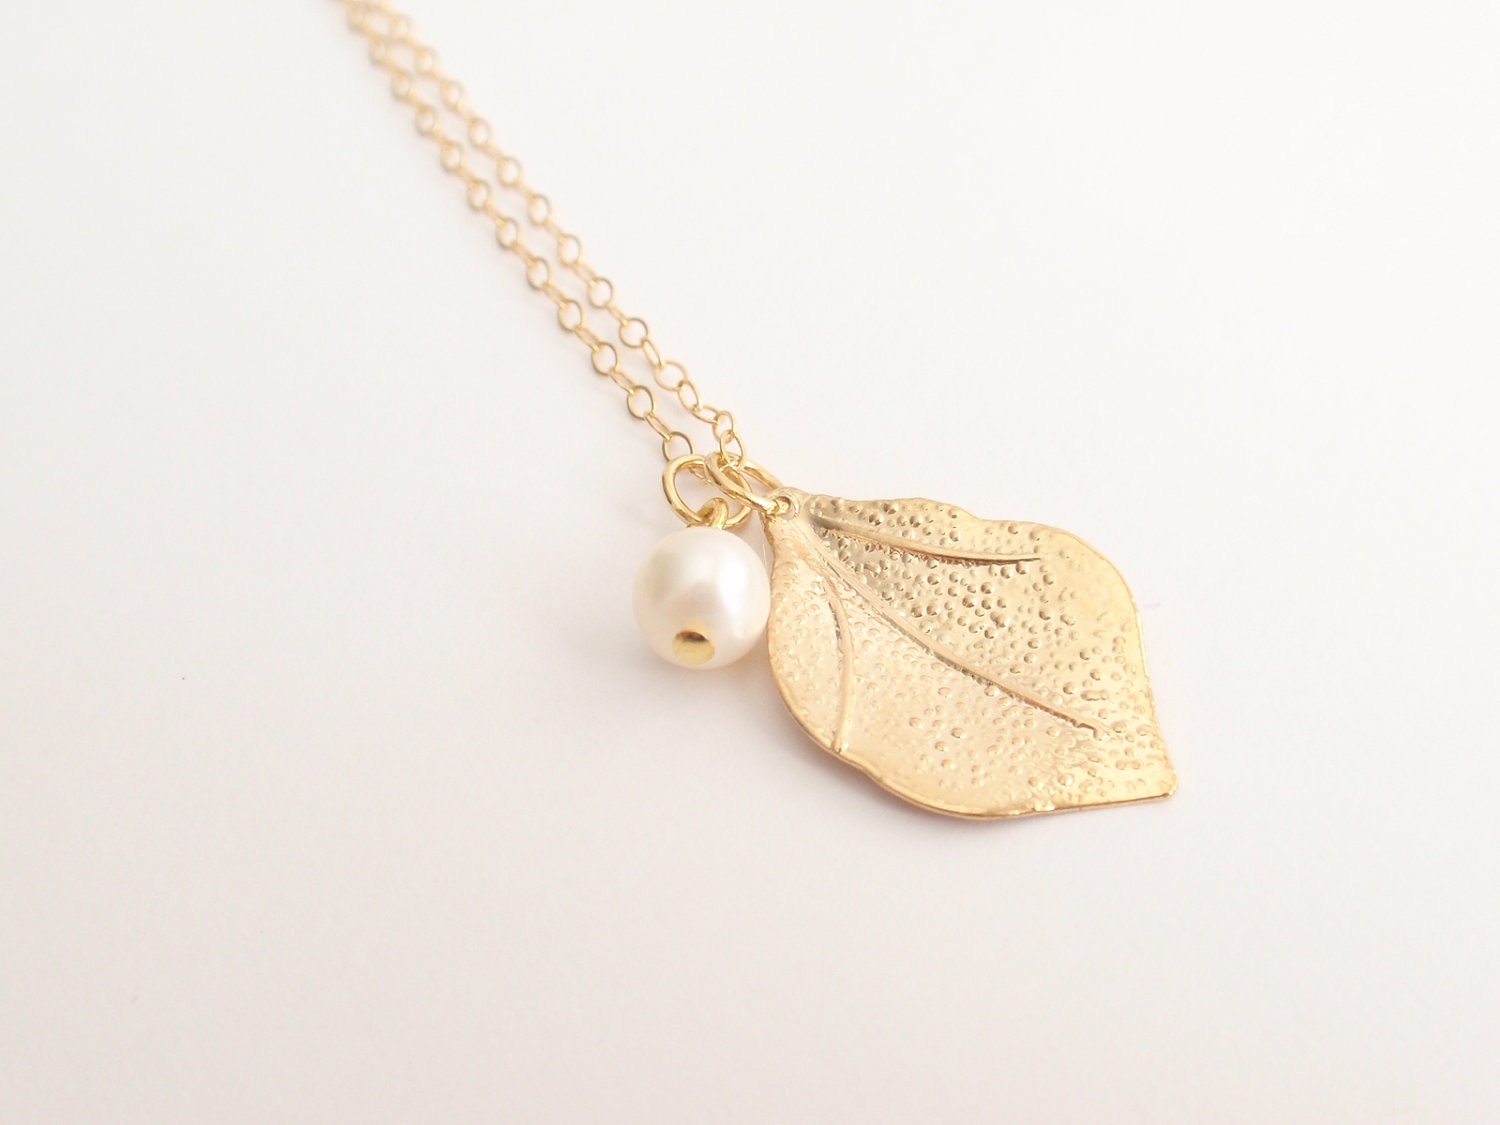 Pearl & Leaf 14K gold filled necklace-simple everyday by Hepzzi